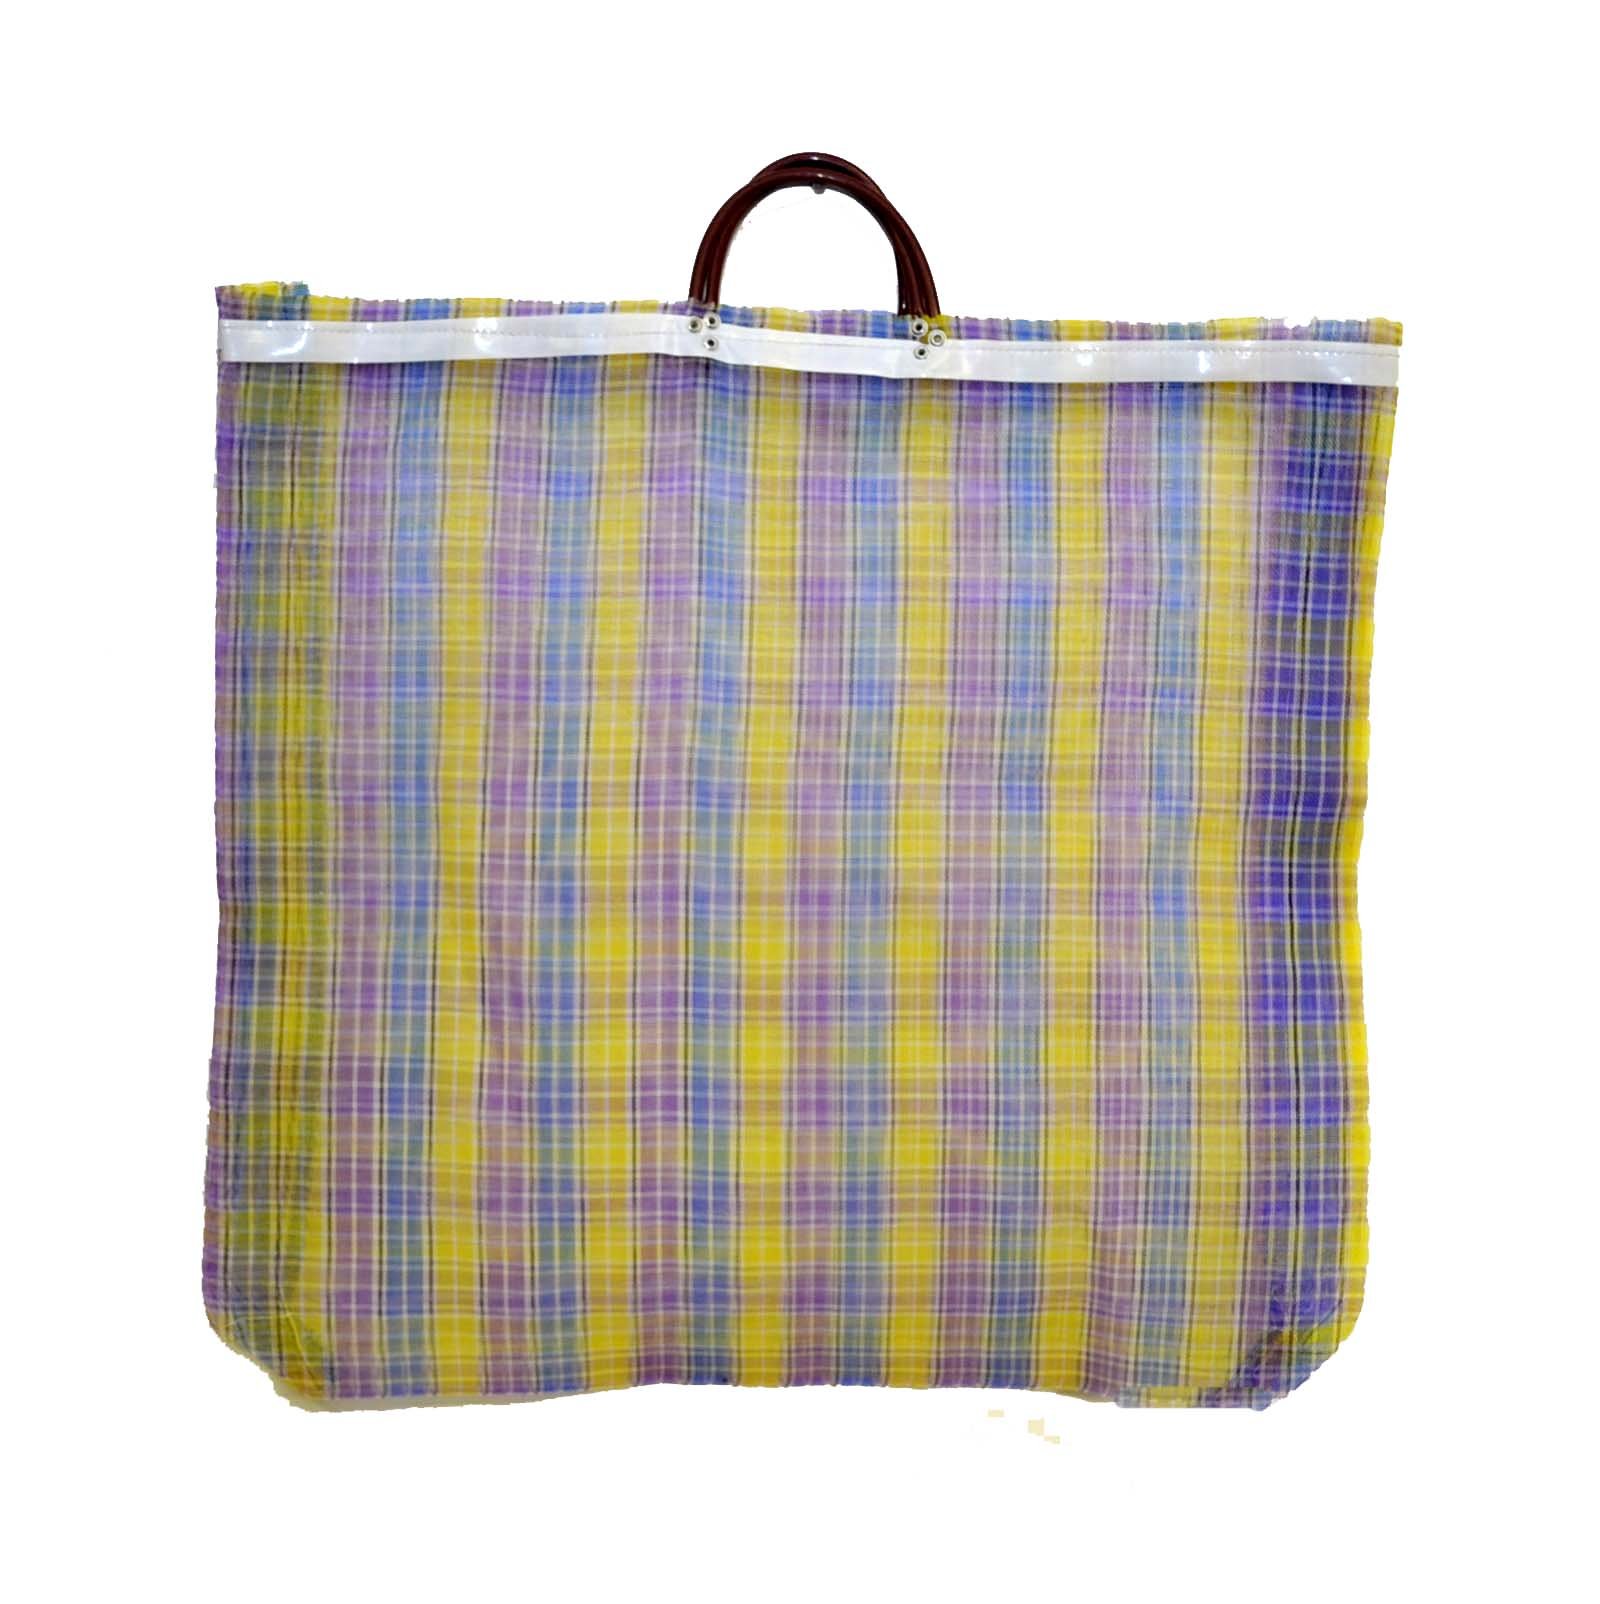 Laredo Import Set of 3, Mexican Tote Grocery/Beach Bags, 23 Inches High by 25.5 Inches Wide. Assorted Colors